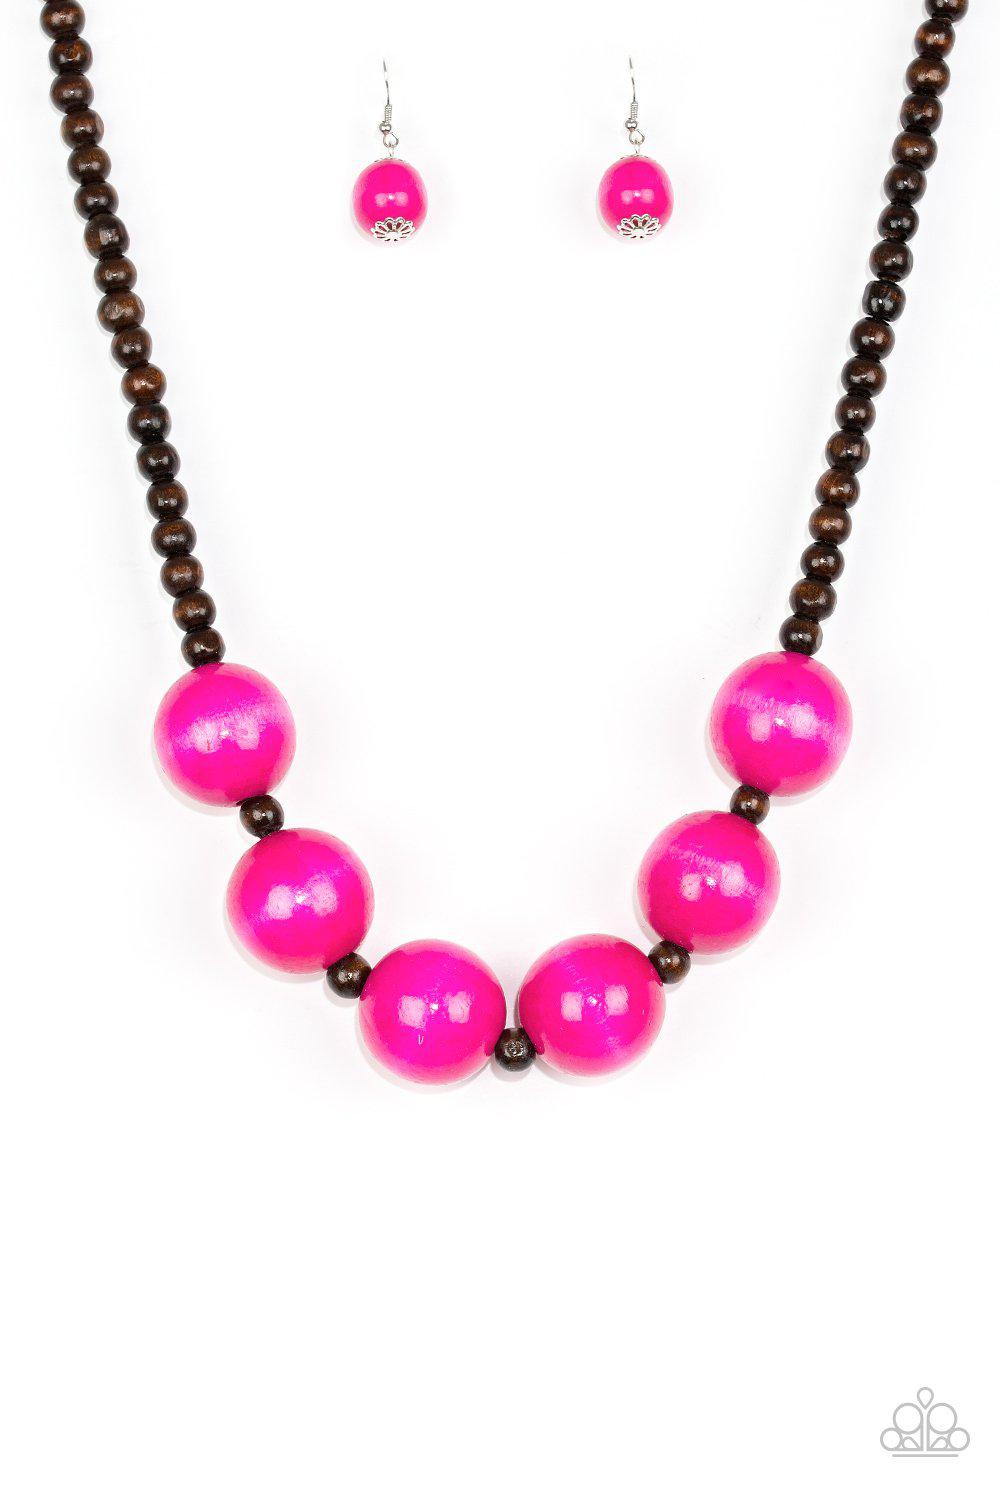 Oh My Miami Pink and Brown Wood Necklace and matching Earrings - Paparazzi Accessories-CarasShop.com - $5 Jewelry by Cara Jewels